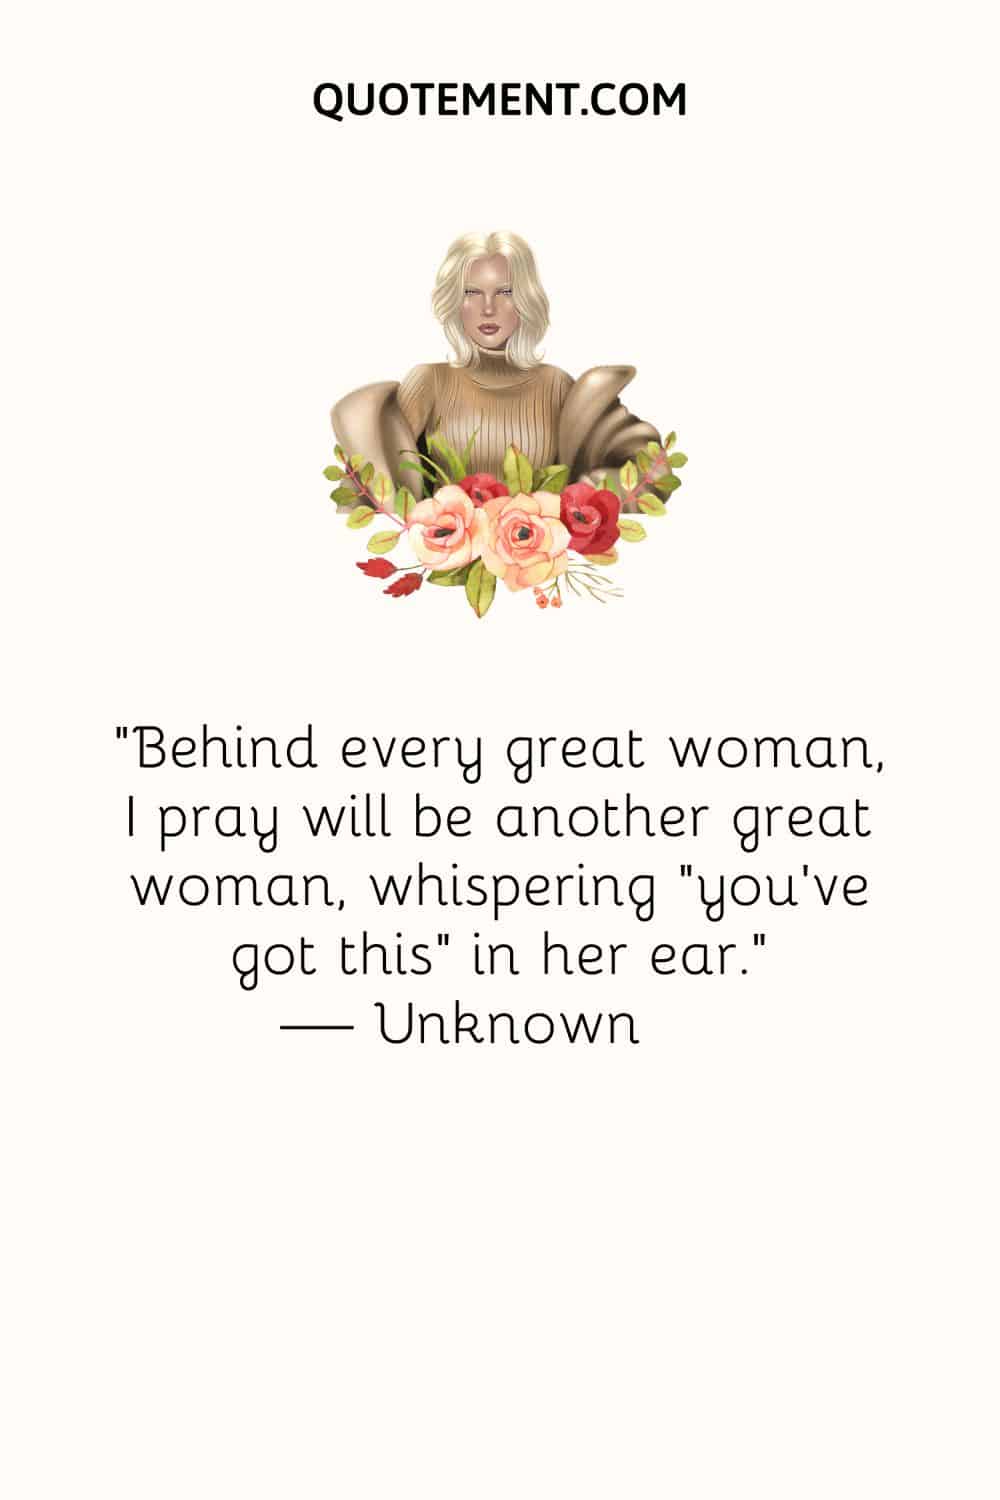 Behind every great woman, I pray will be another great woman, whispering “you’ve got this” in her ear.